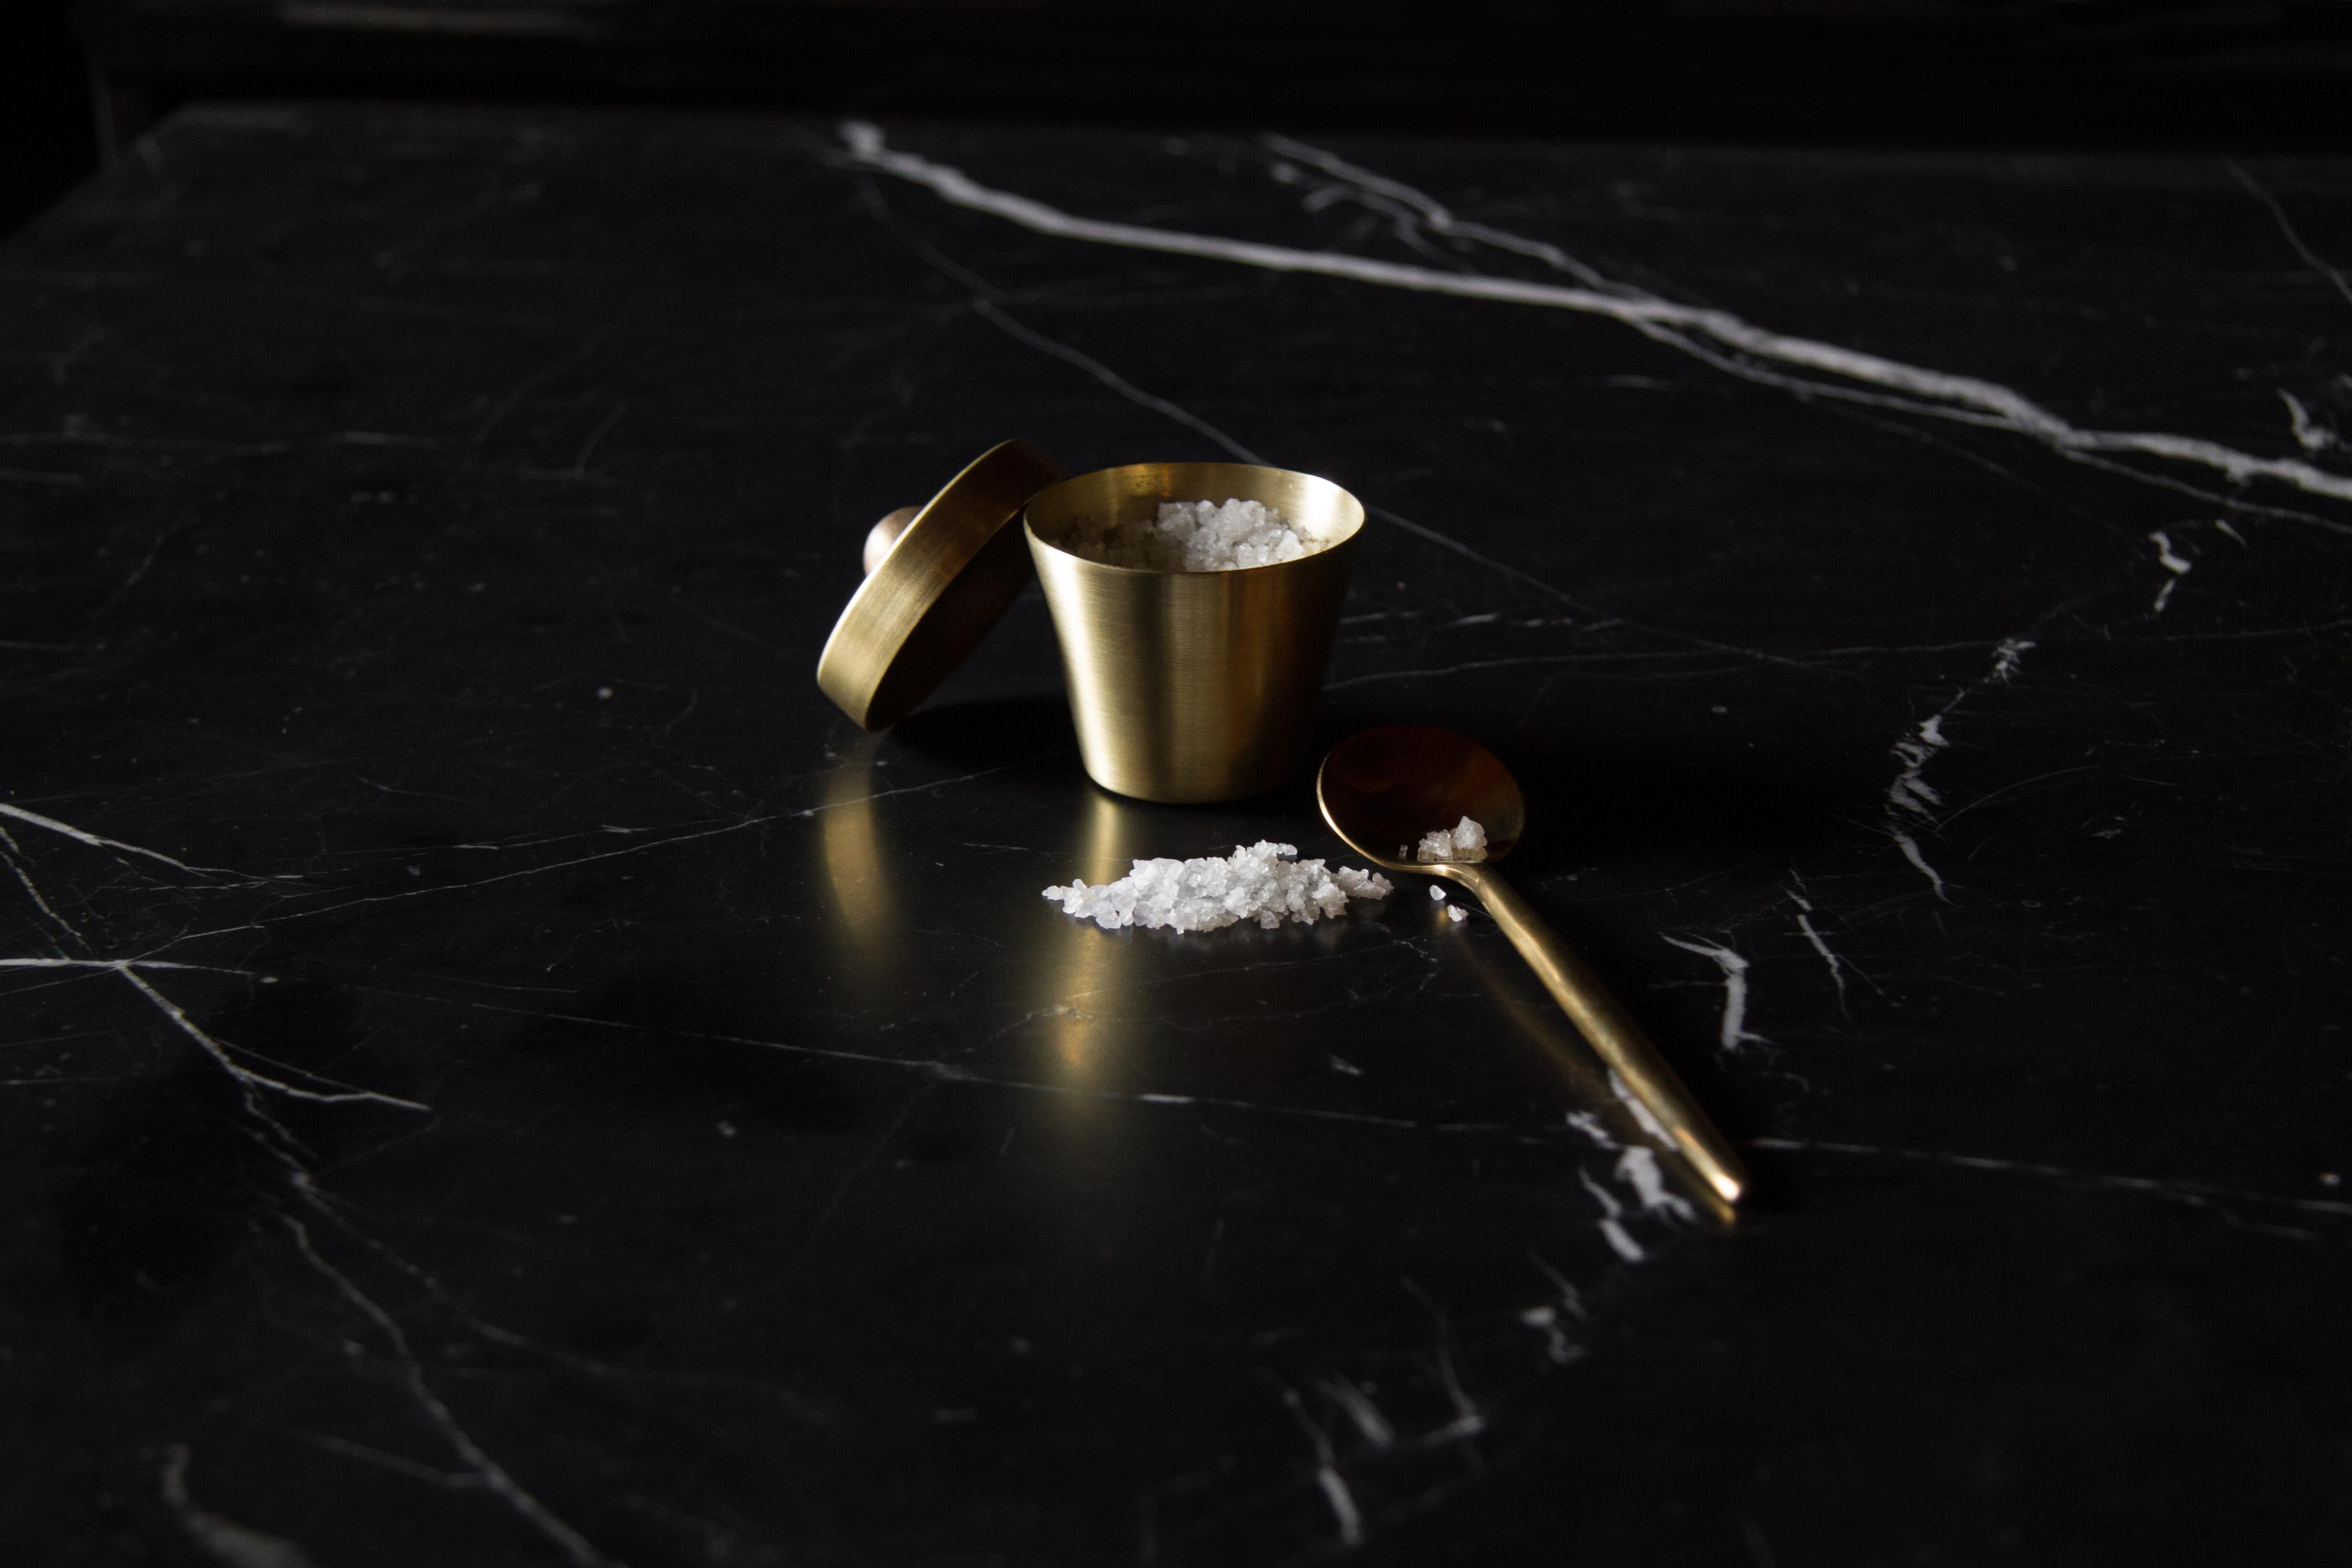 The (wh)ORE HAüS STUDIOS small goods collection was made for those that wanted to experience the (wh)ORE HAüS brand without committing to our larger pieces. The brass pinch dish is made of spun solid brass. Spoon is not included.

(wh)ORE HAüS